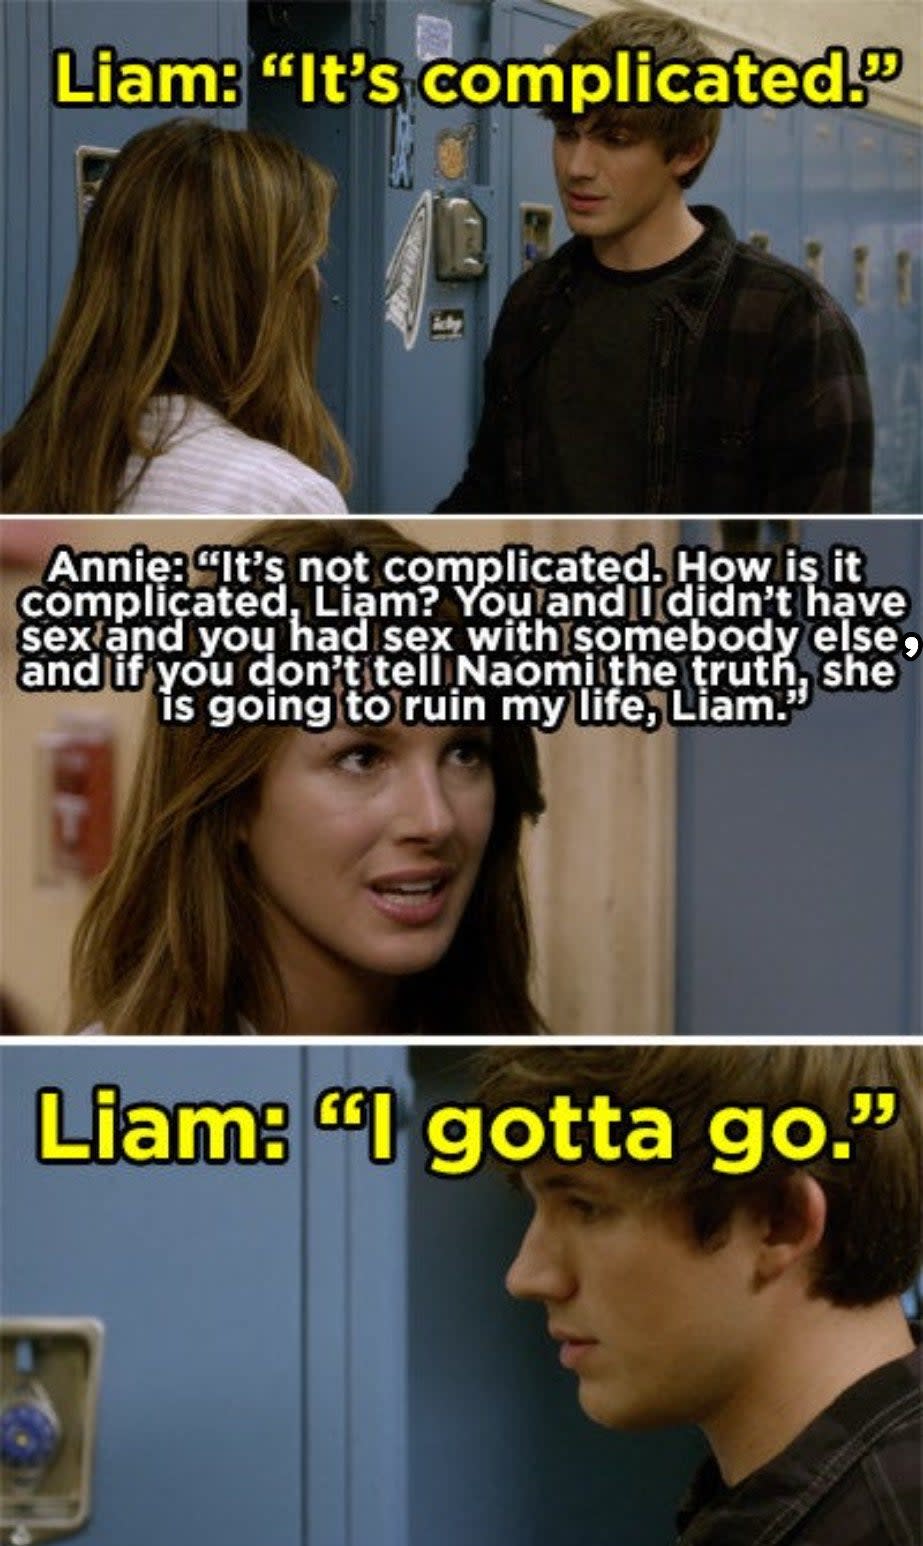 Annie begging Liam to tell Naomi the truth